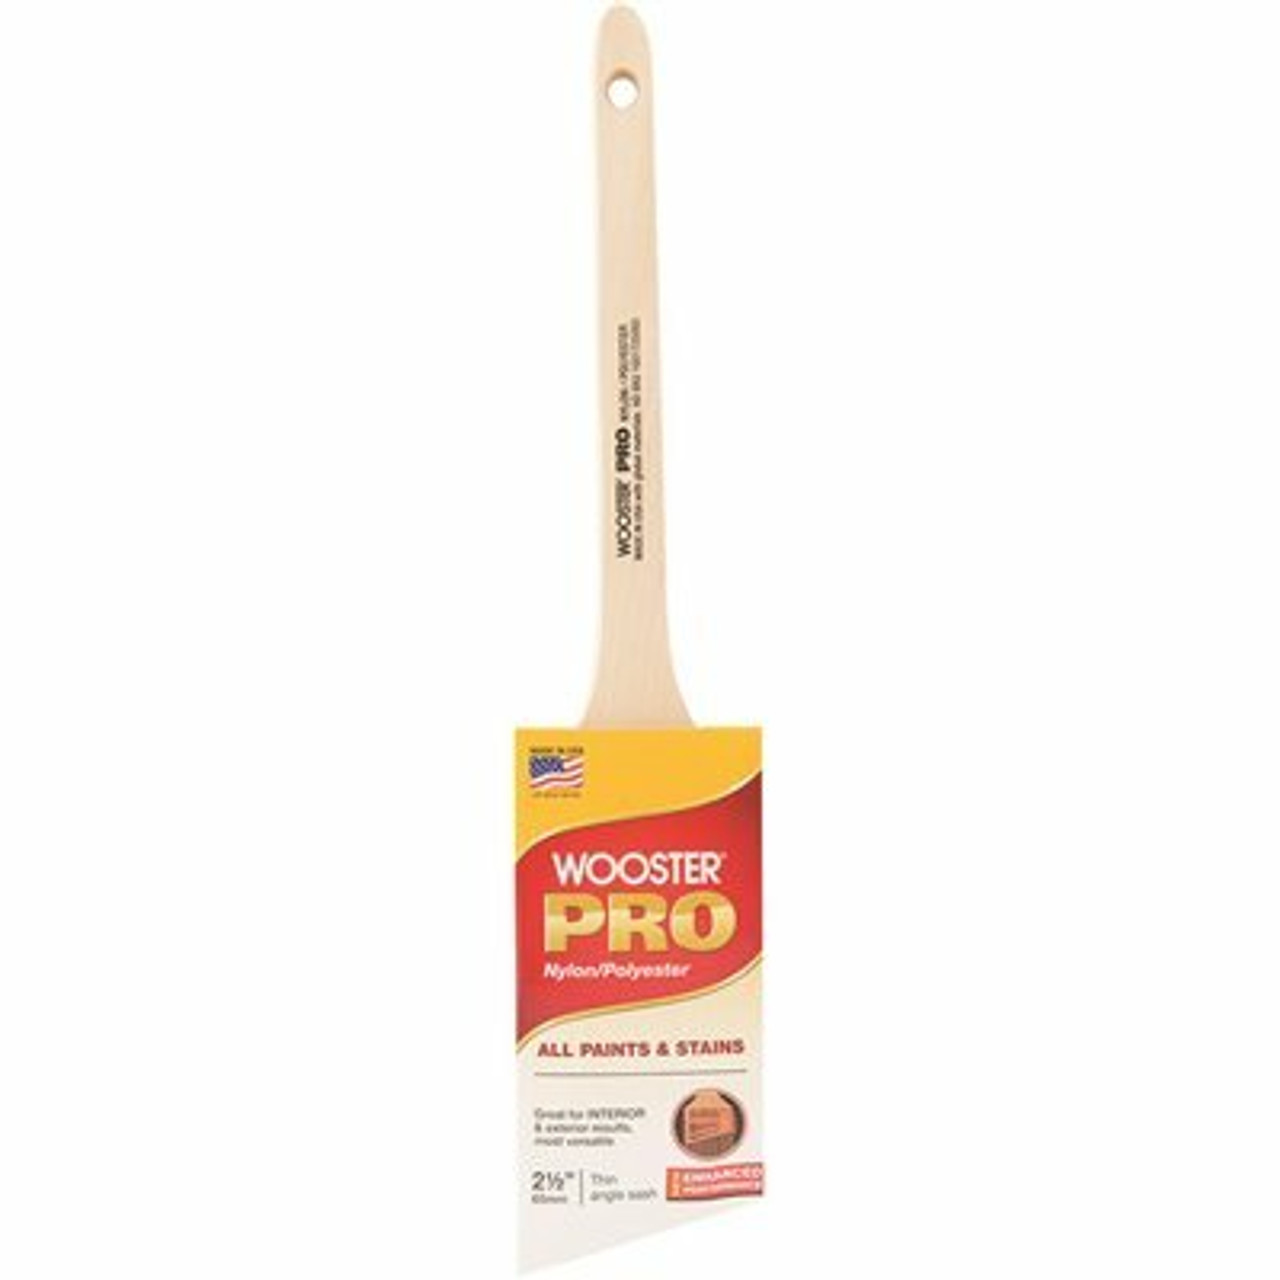 Wooster 2-1/2 In. Pro Nylon/Polyester Thin Angle Sash Brush